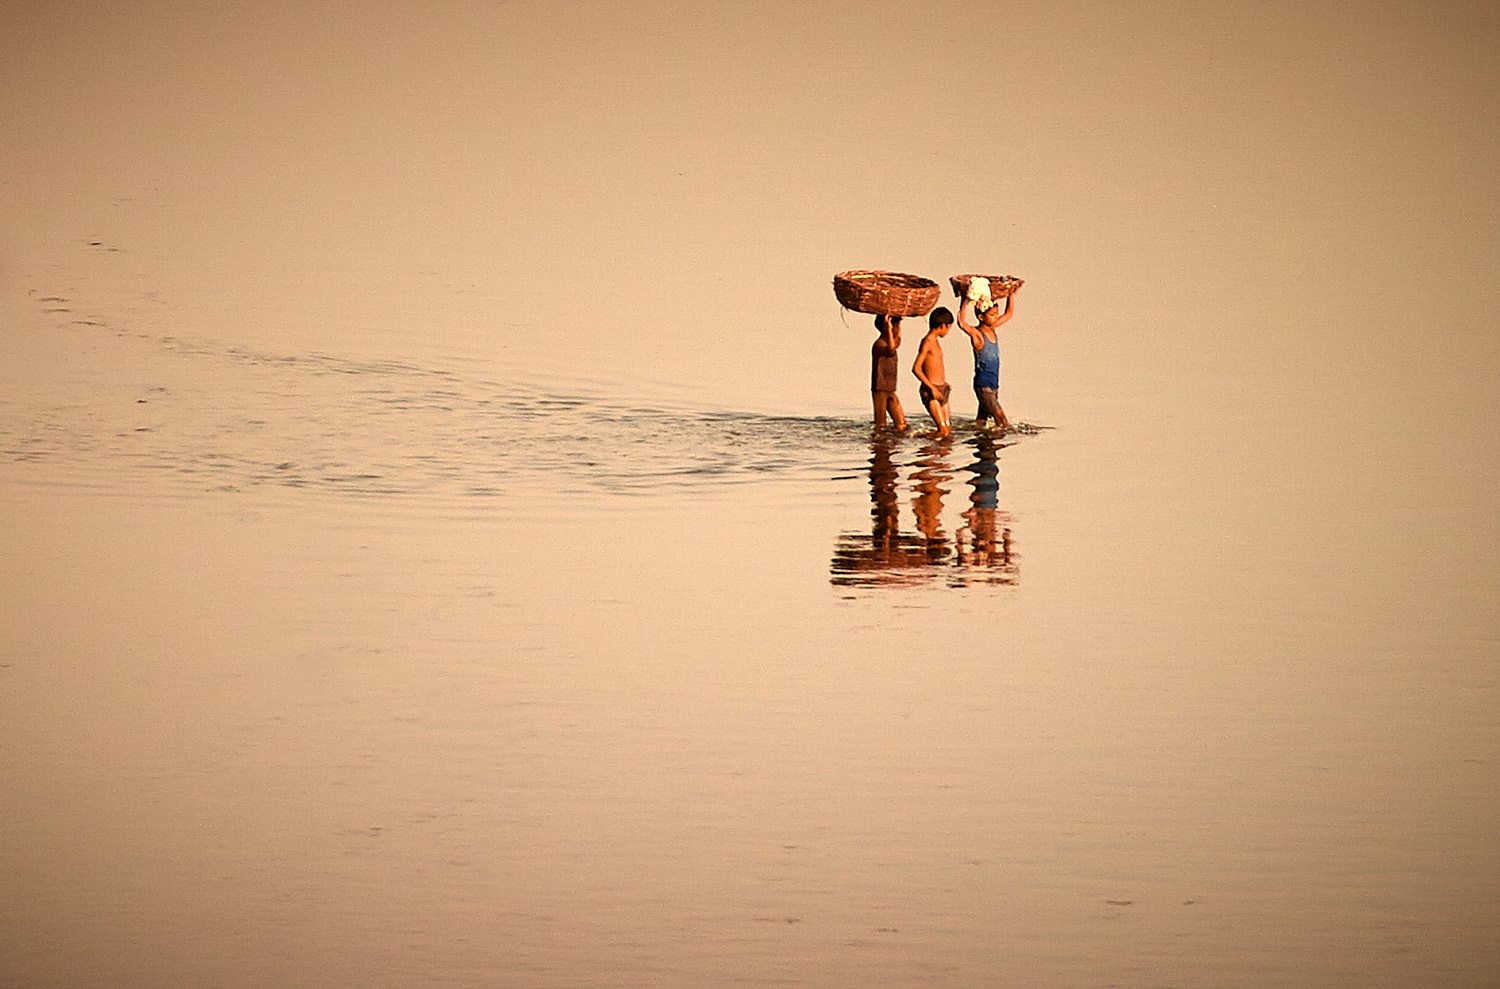 Youths in the Yamuna River, Agra, India